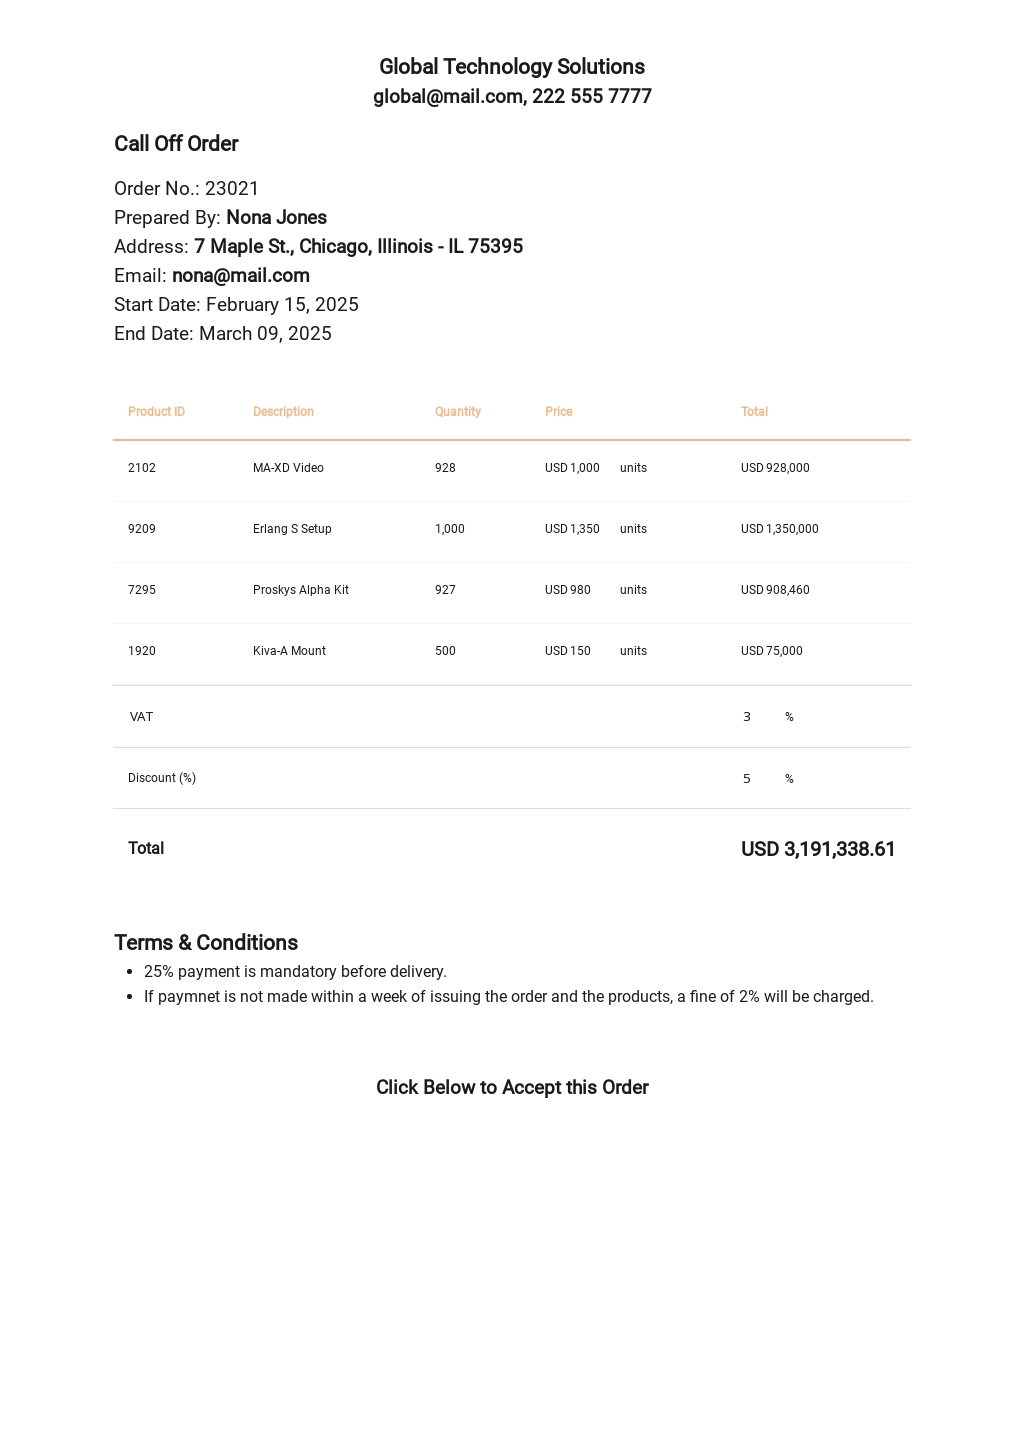 Call Off Order Form (Software Development & Licensing) Template 1.jpe